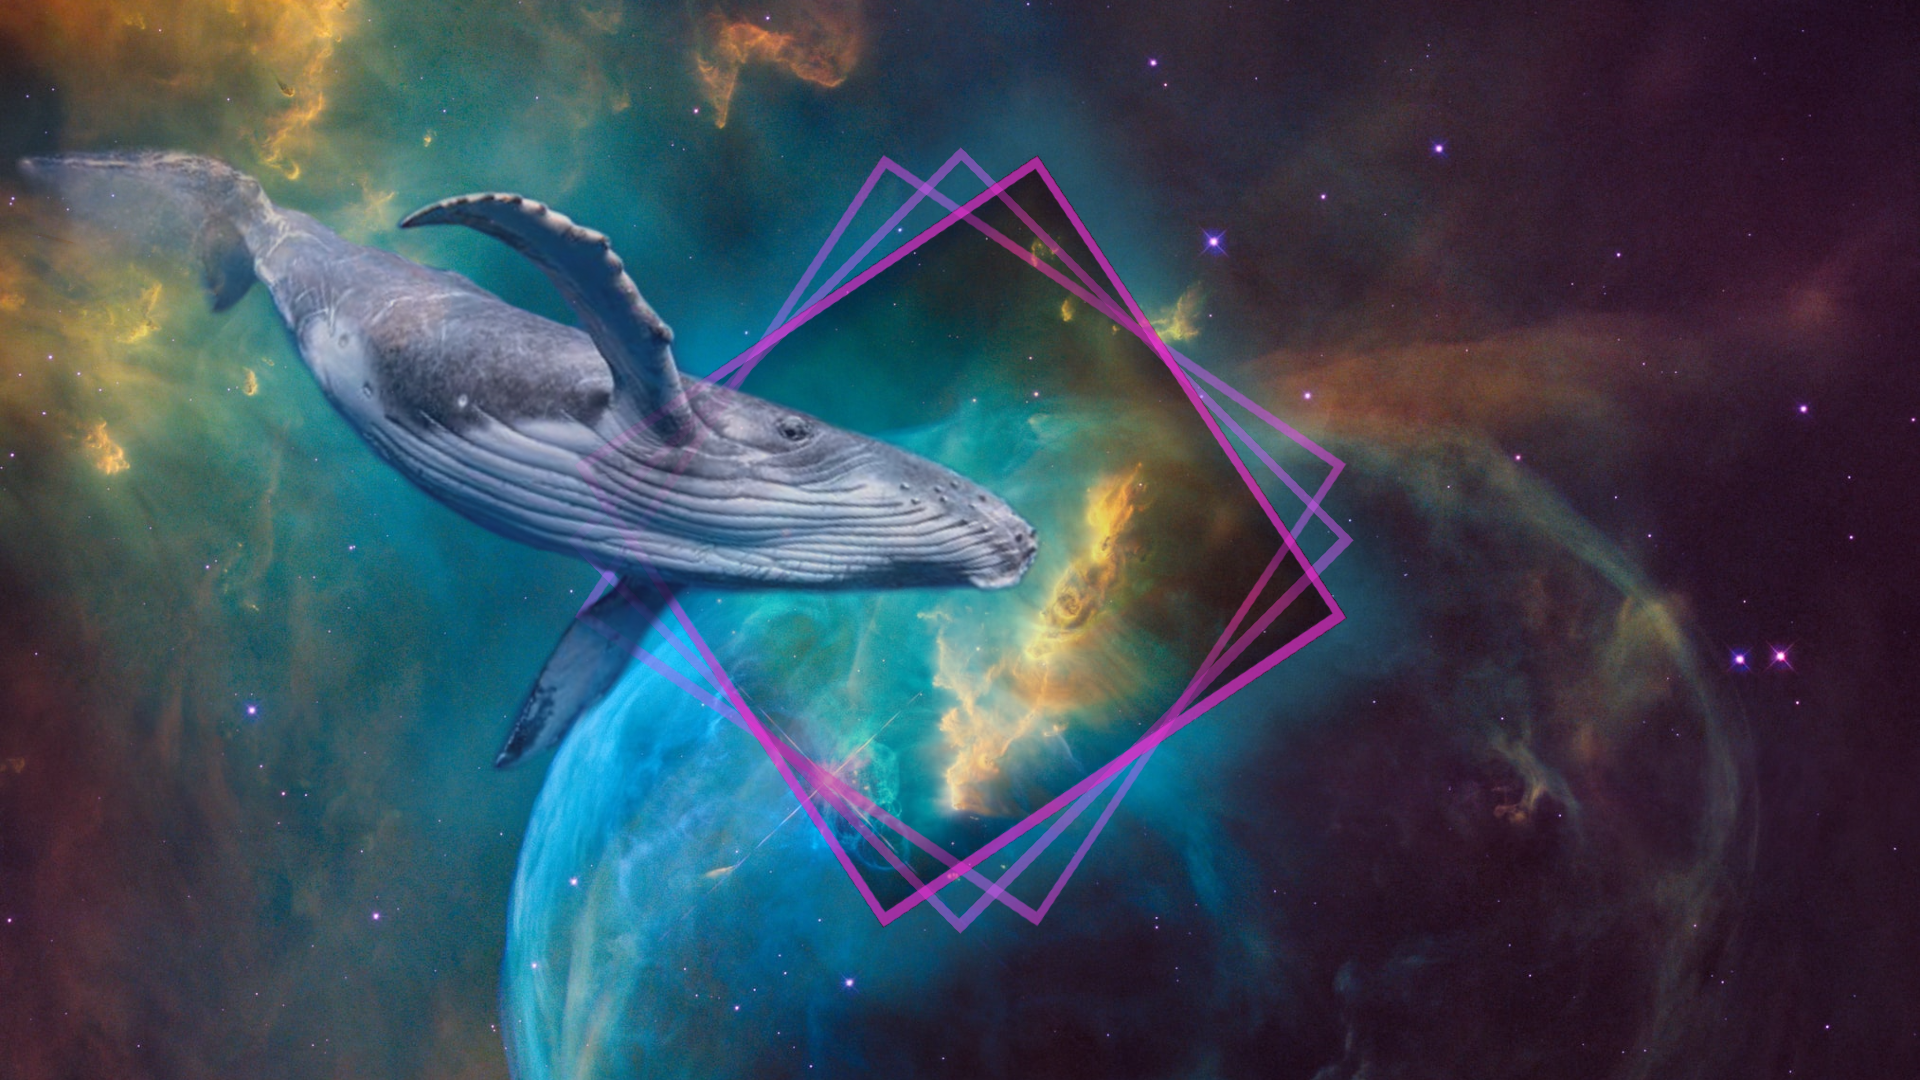 Space whale vibes